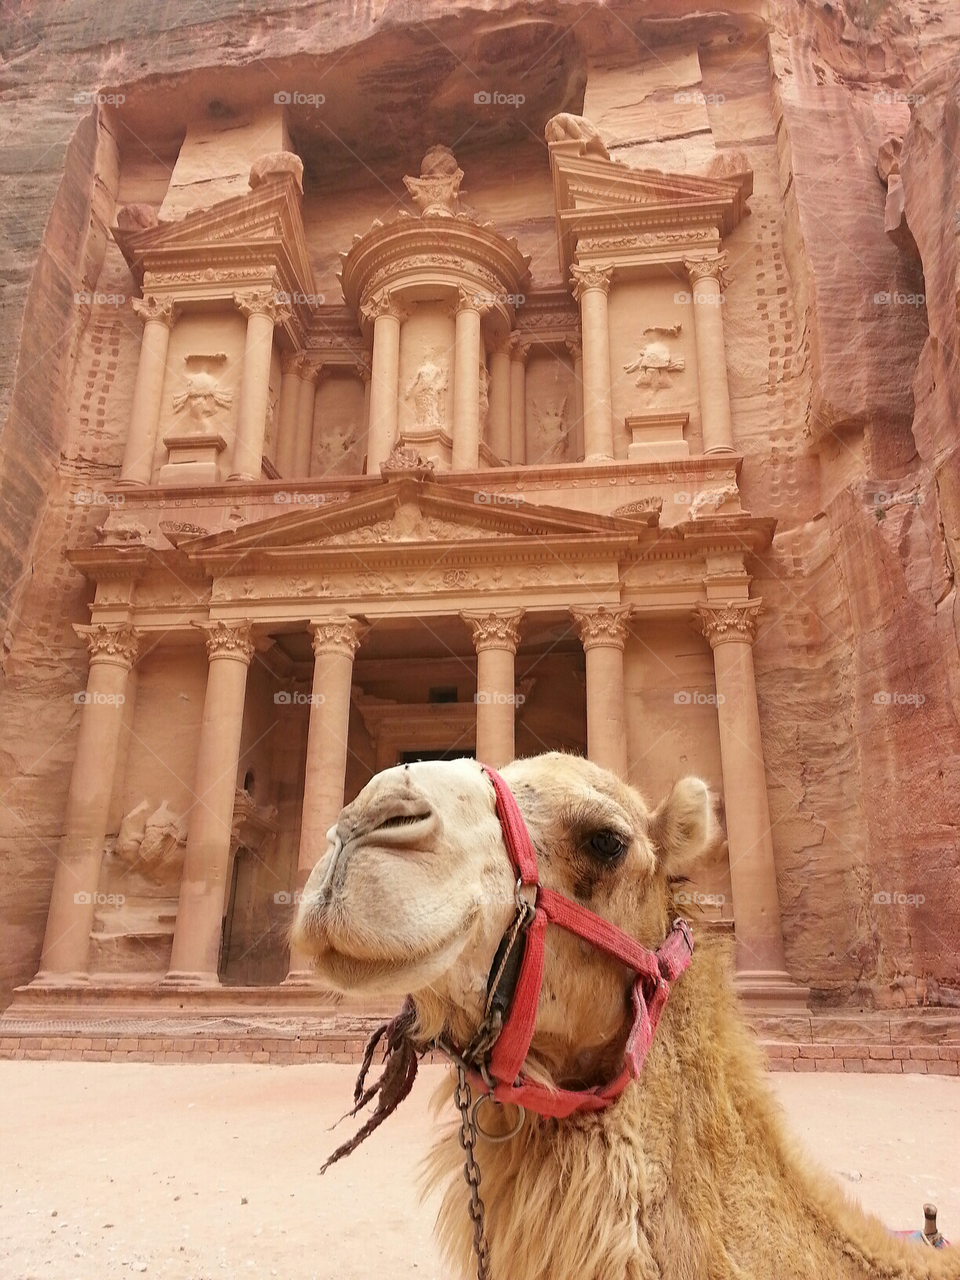 What appears to be a smiling camel at Petra, Jordan.